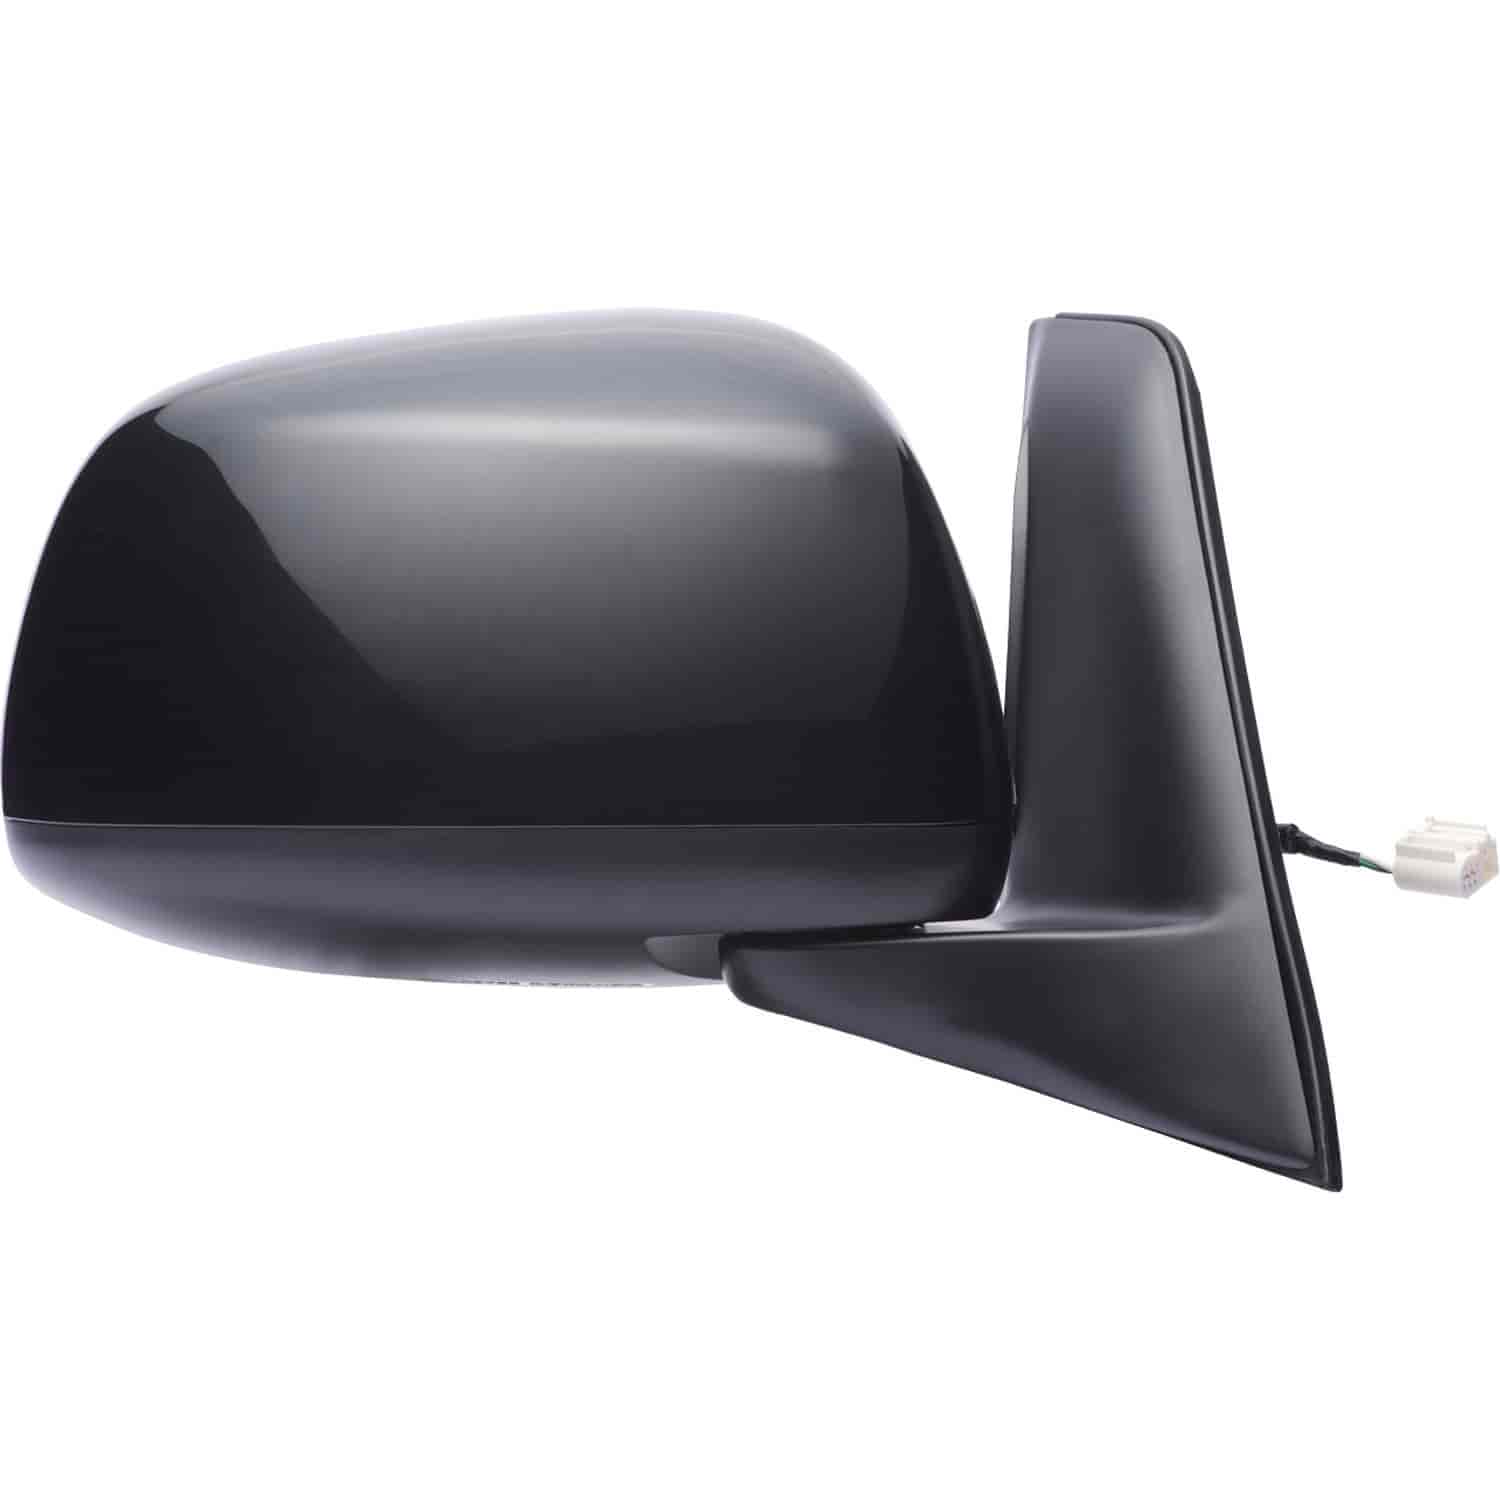 OEM Style Replacement mirror for 07-13 Suzuki SX4 passenger side mirror tested to fit and function l